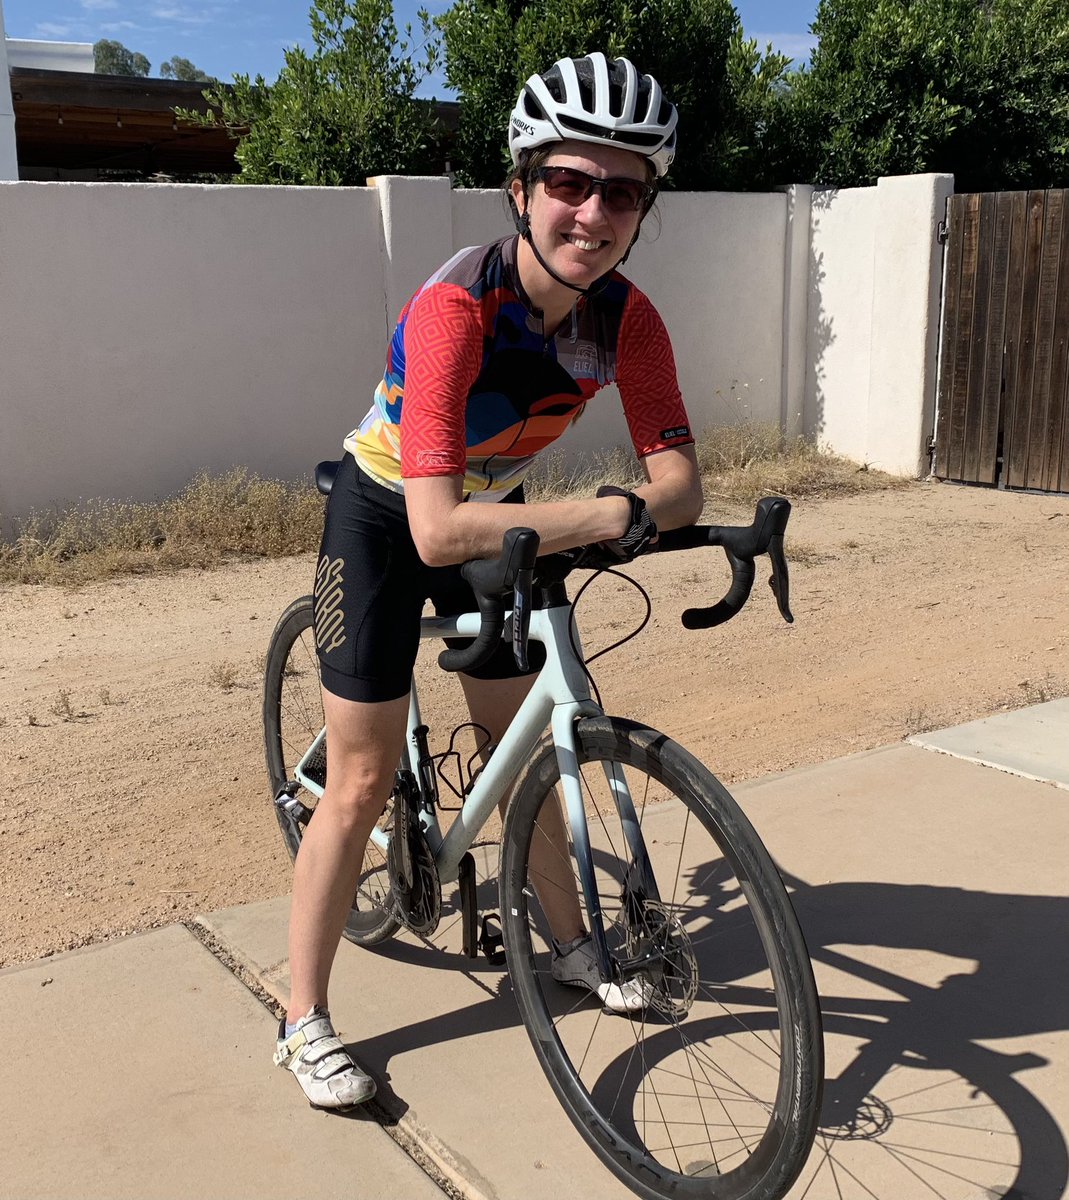 380 Miles so far, over half-way to my distance goal of 725 miles. 🚴‍♀️🩸🚴‍♀️🩸I'm cycling this month to raise awareness and funds for @MPN_RF! Please consider supporting me! Thank you!! secure.qgiv.com/event/gtdmpn22…